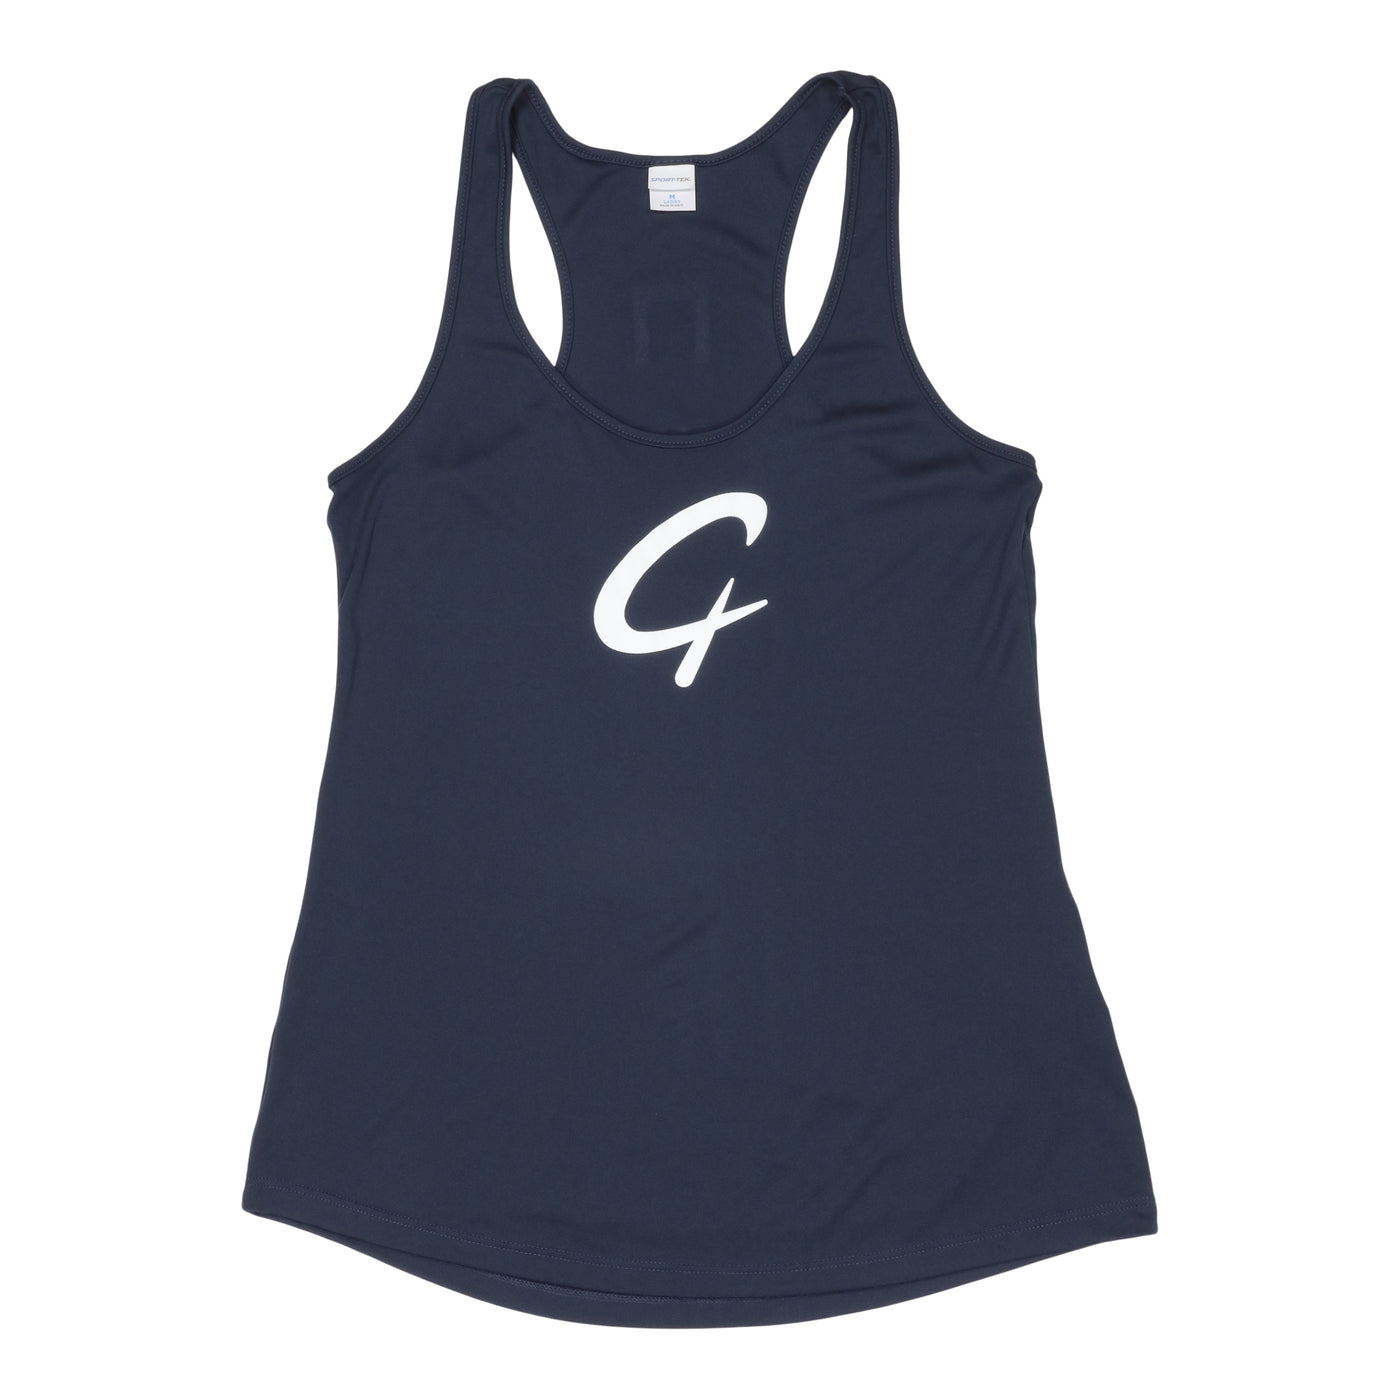 Created Women's Performance navy tank top front view